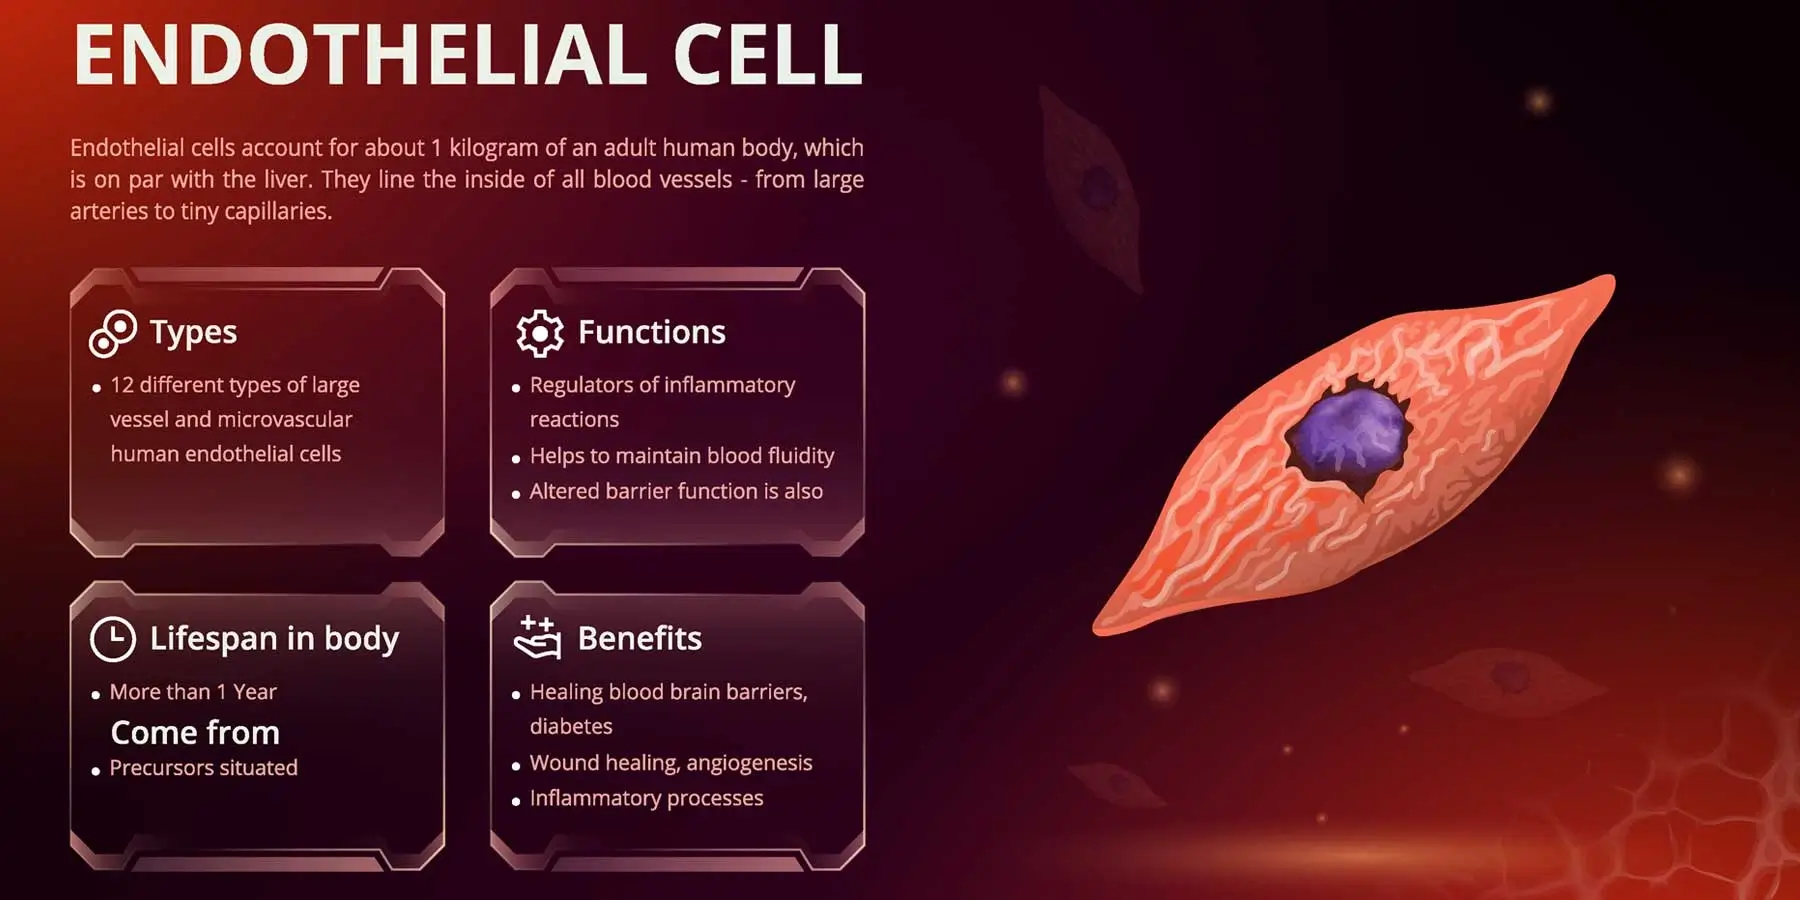 PEMF And Effects On Endothelial Cells For Wound Healing